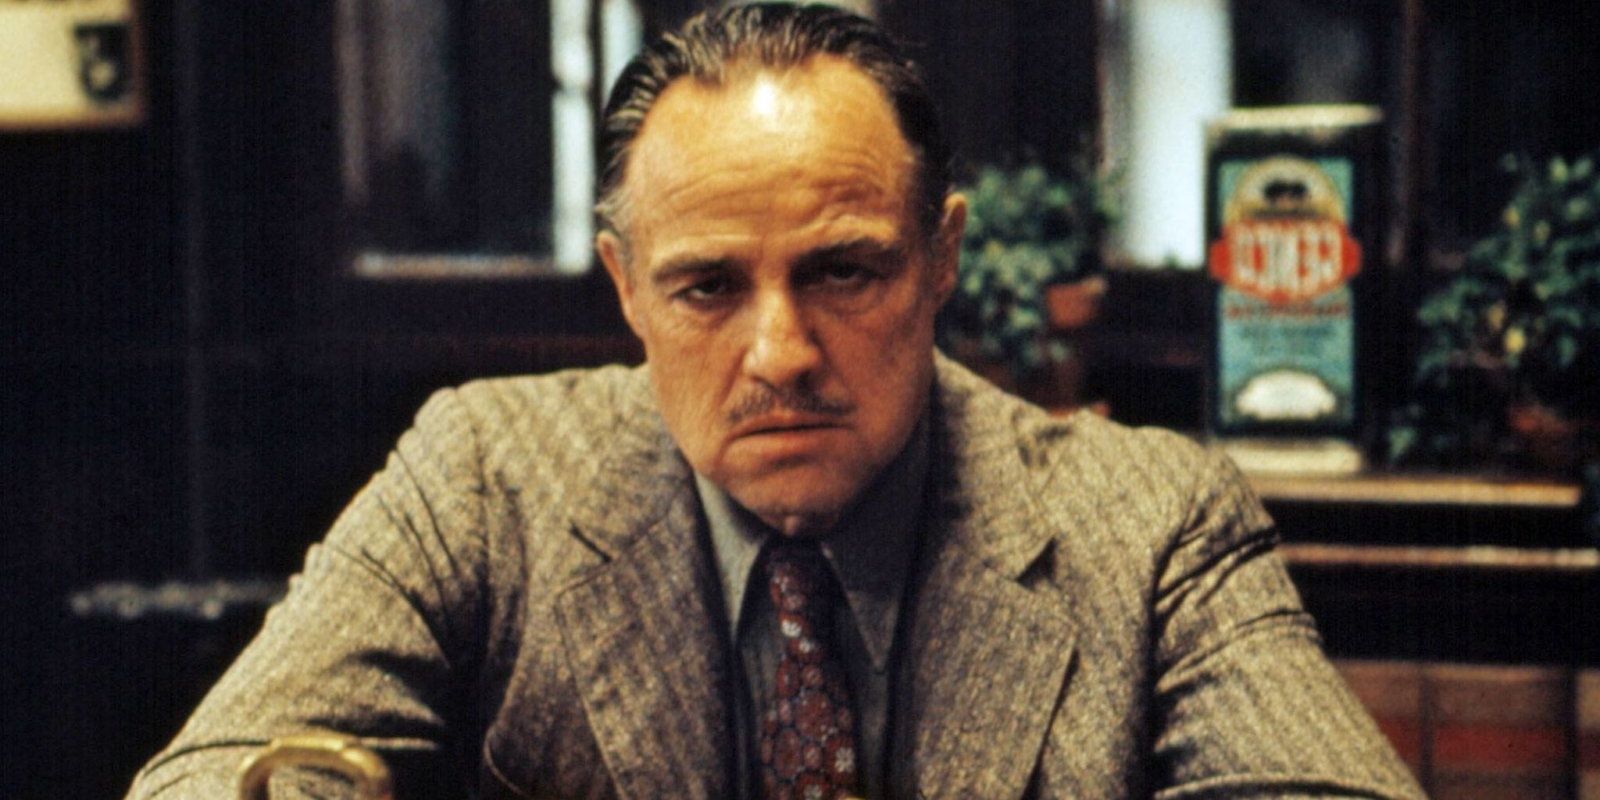 Vito Corleone discuses Nevada investments with his Consigliere in The Godfather